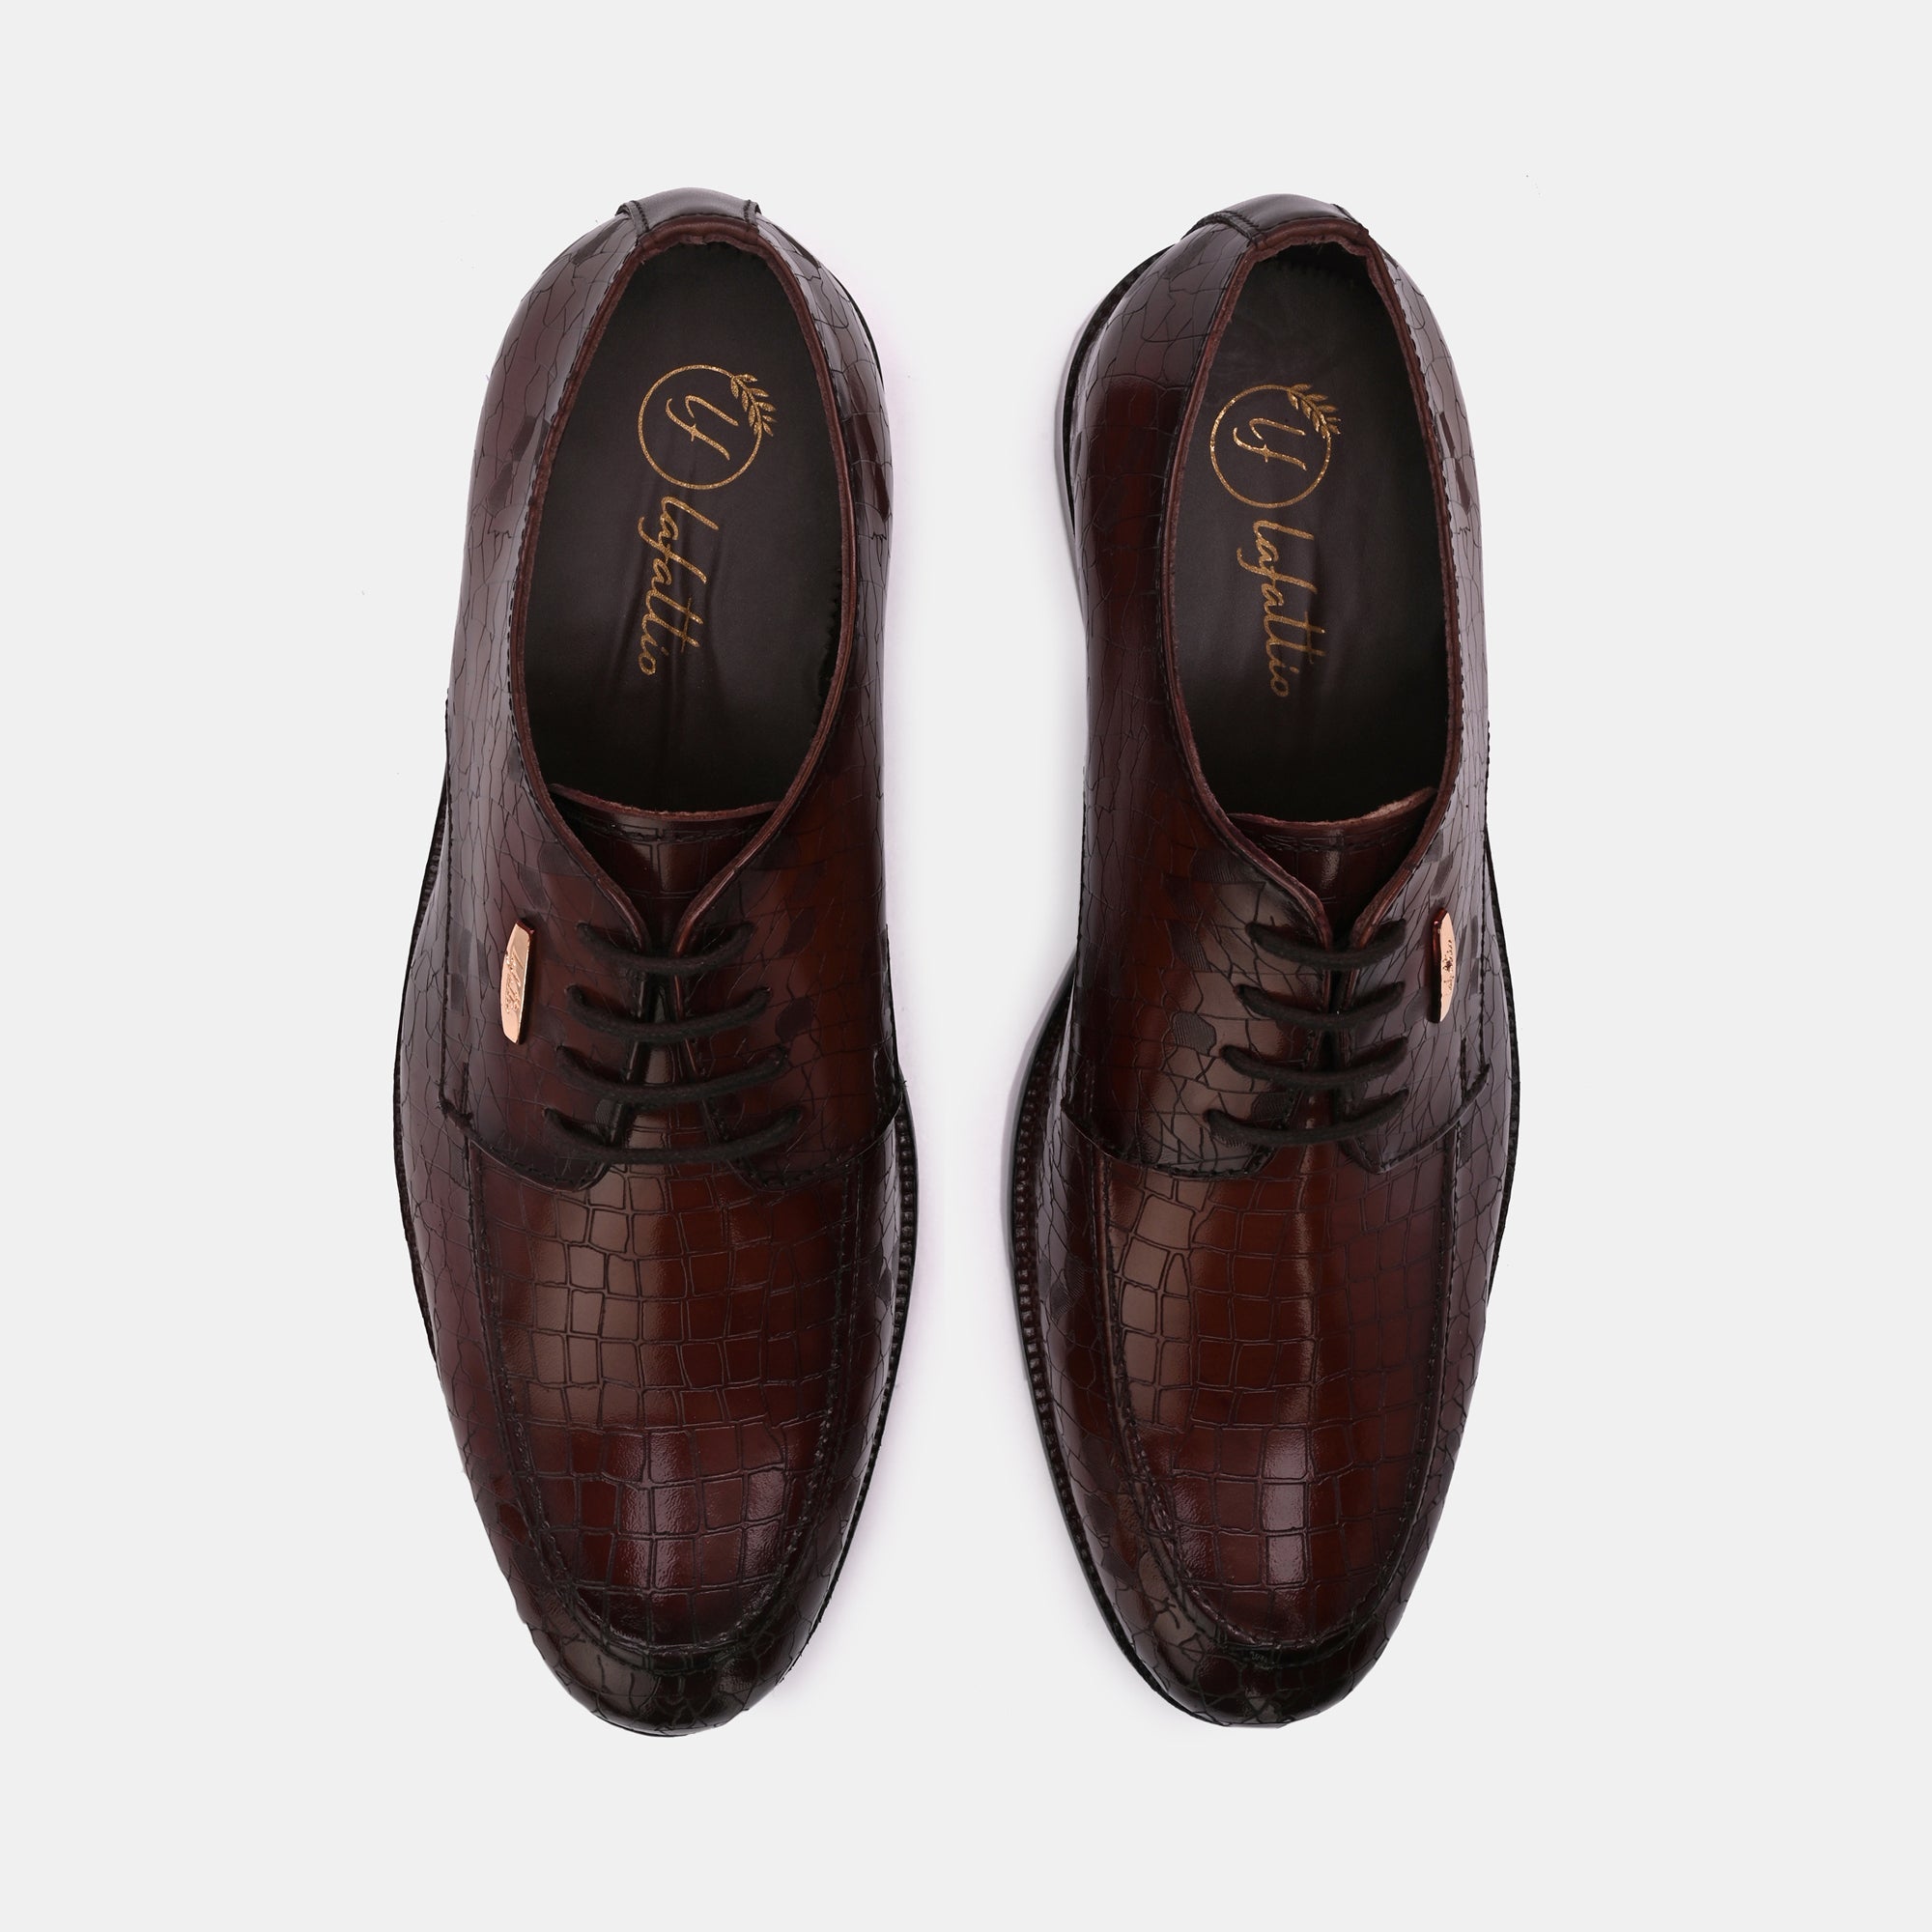 Cherry Laser Engraved Lace-Up Shoes by Lafattio